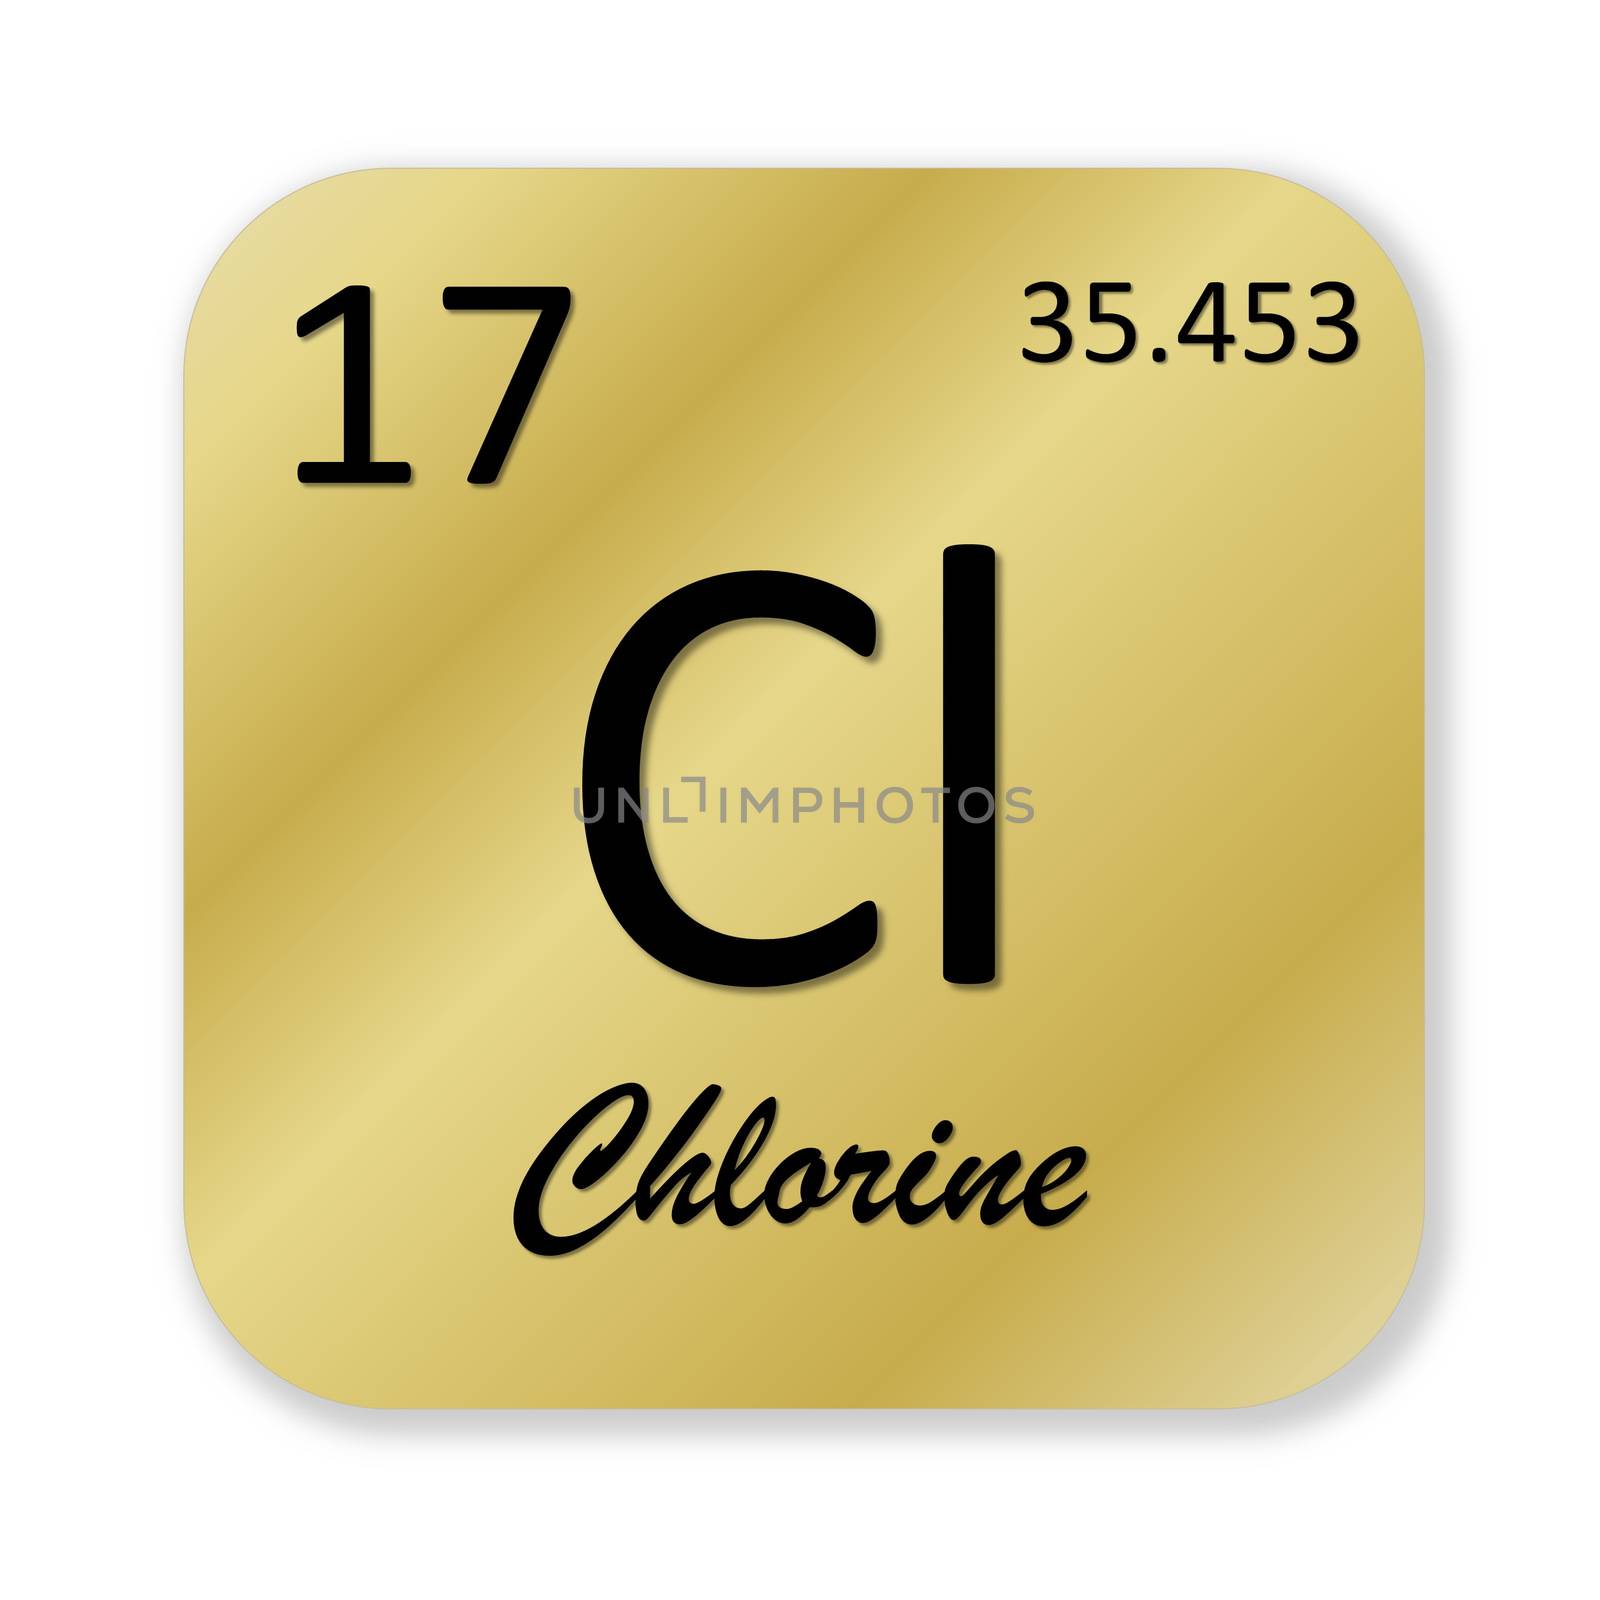 Black chlorine element into golden square shape isolated in white background